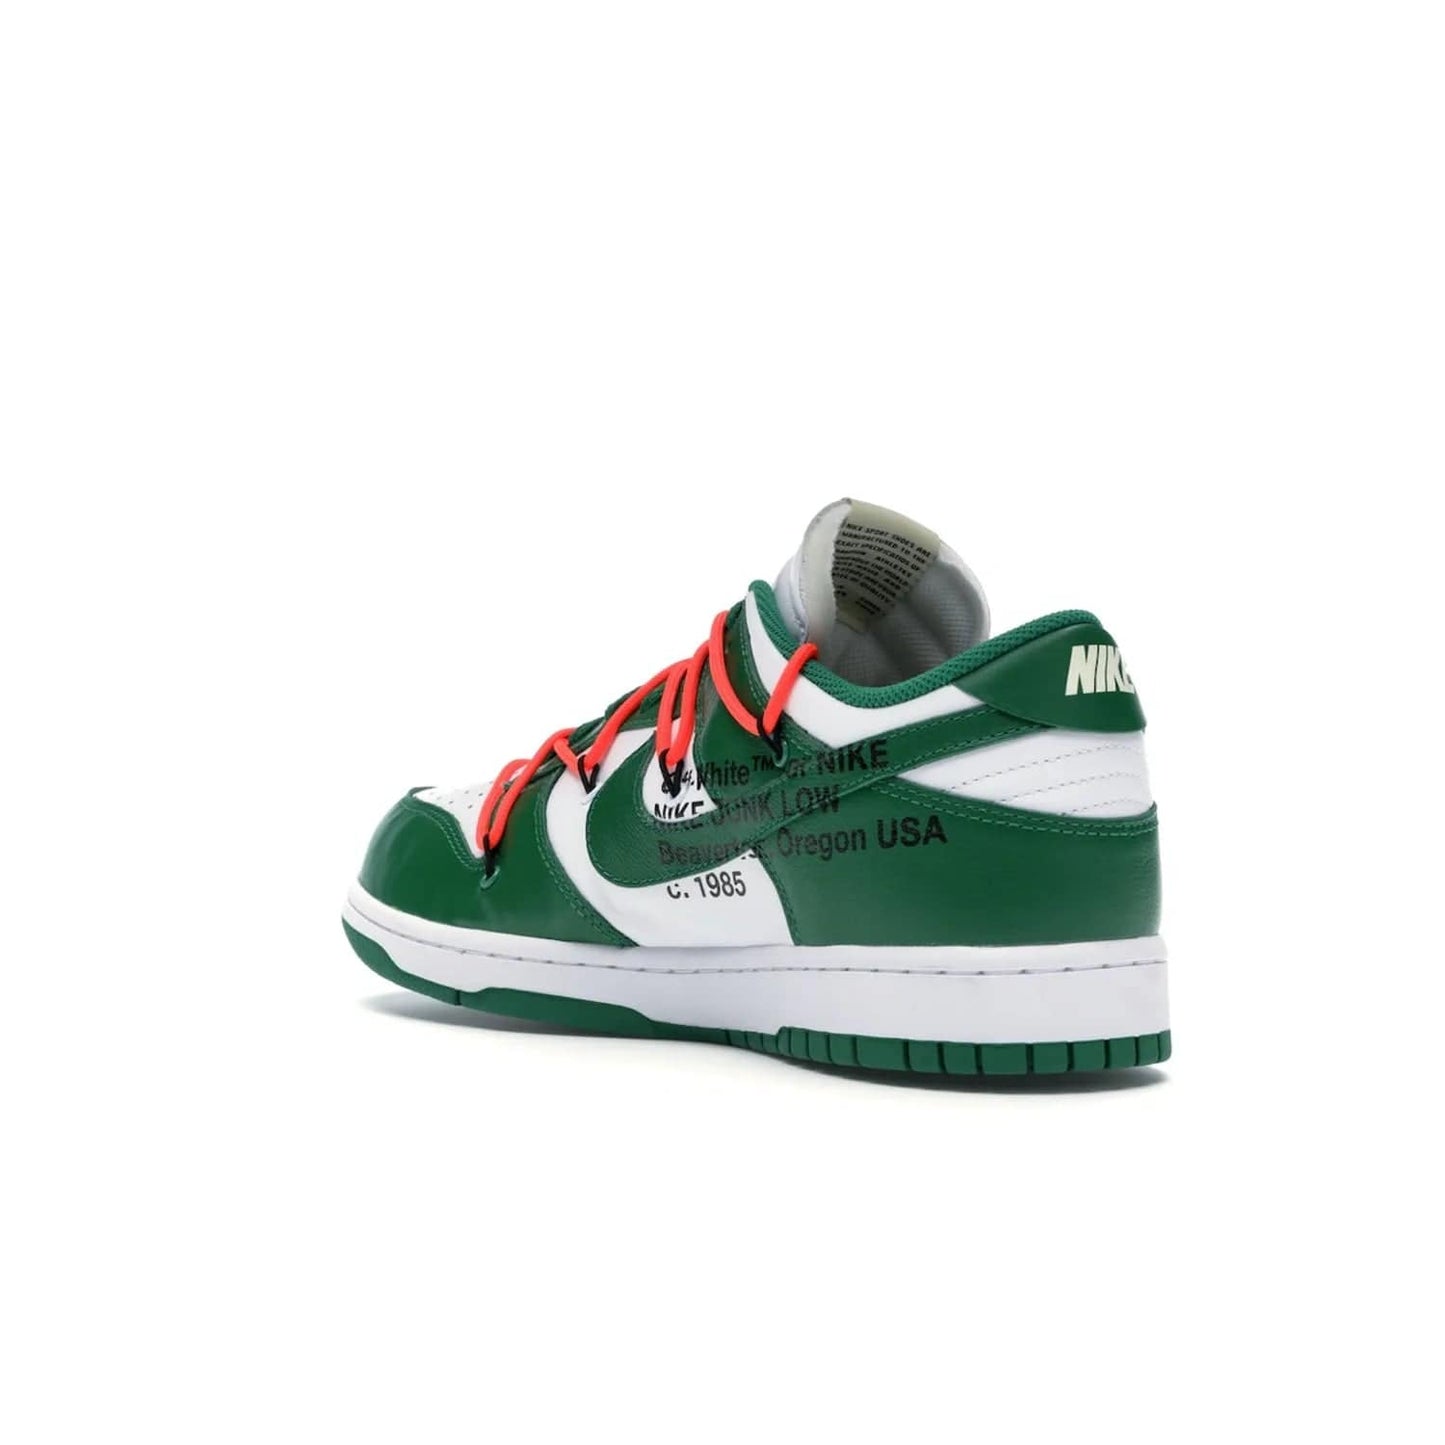 Nike Dunk Low Off-White Pine Green - Image 24 - Only at www.BallersClubKickz.com - The Nike Dunk Low Off-White Pine Green combines classic 1980s style with modern-day design. Featuring white leather uppers and pine green overlays, these classic kicks feature secondary lacing system, zip-ties and signature Off-White text. Releasing in December 2019, these shoes are a timeless classic for any wardrobe.